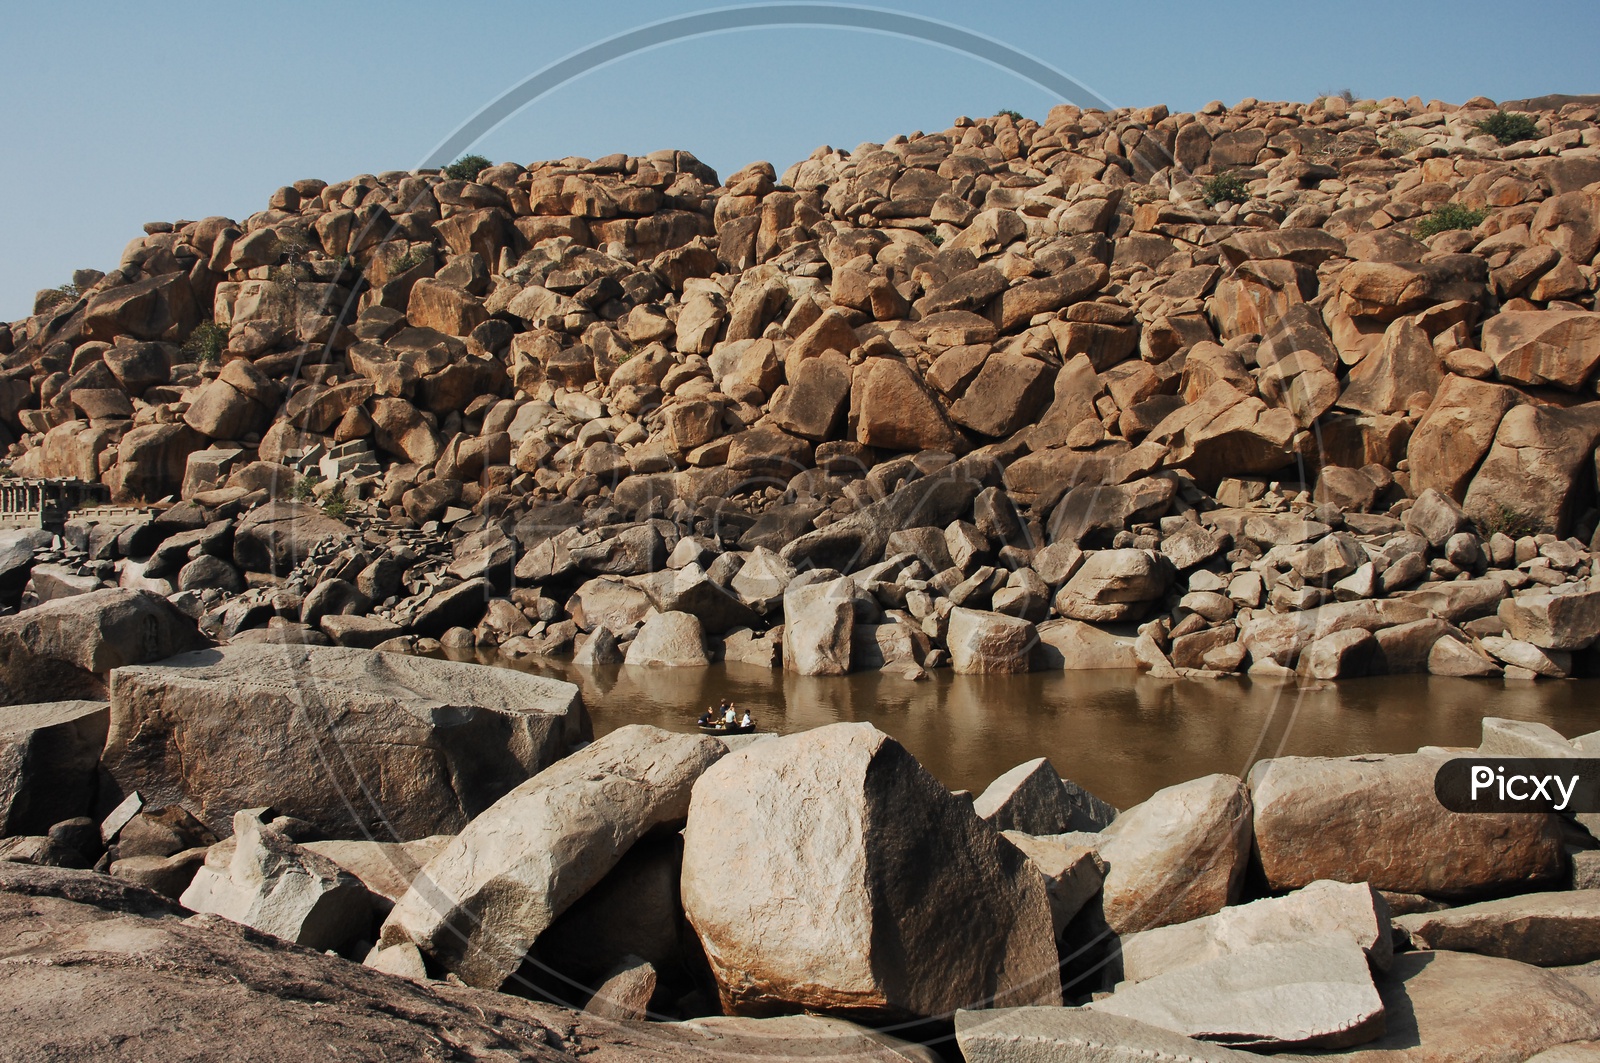 large rocks in an open area and water beside